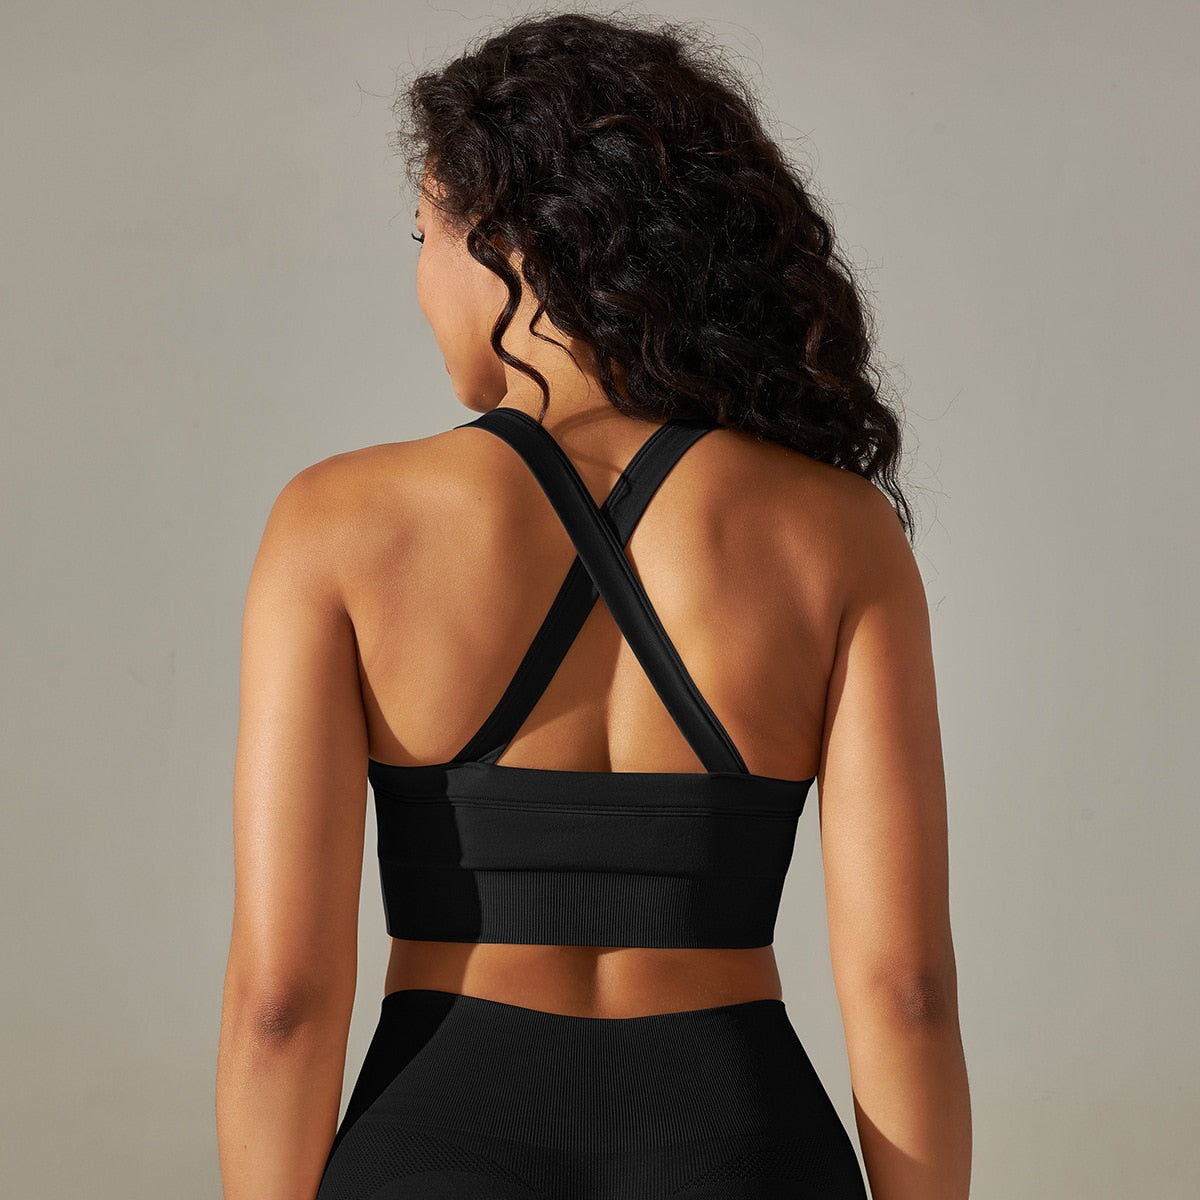 Women Gym Fitness Suits